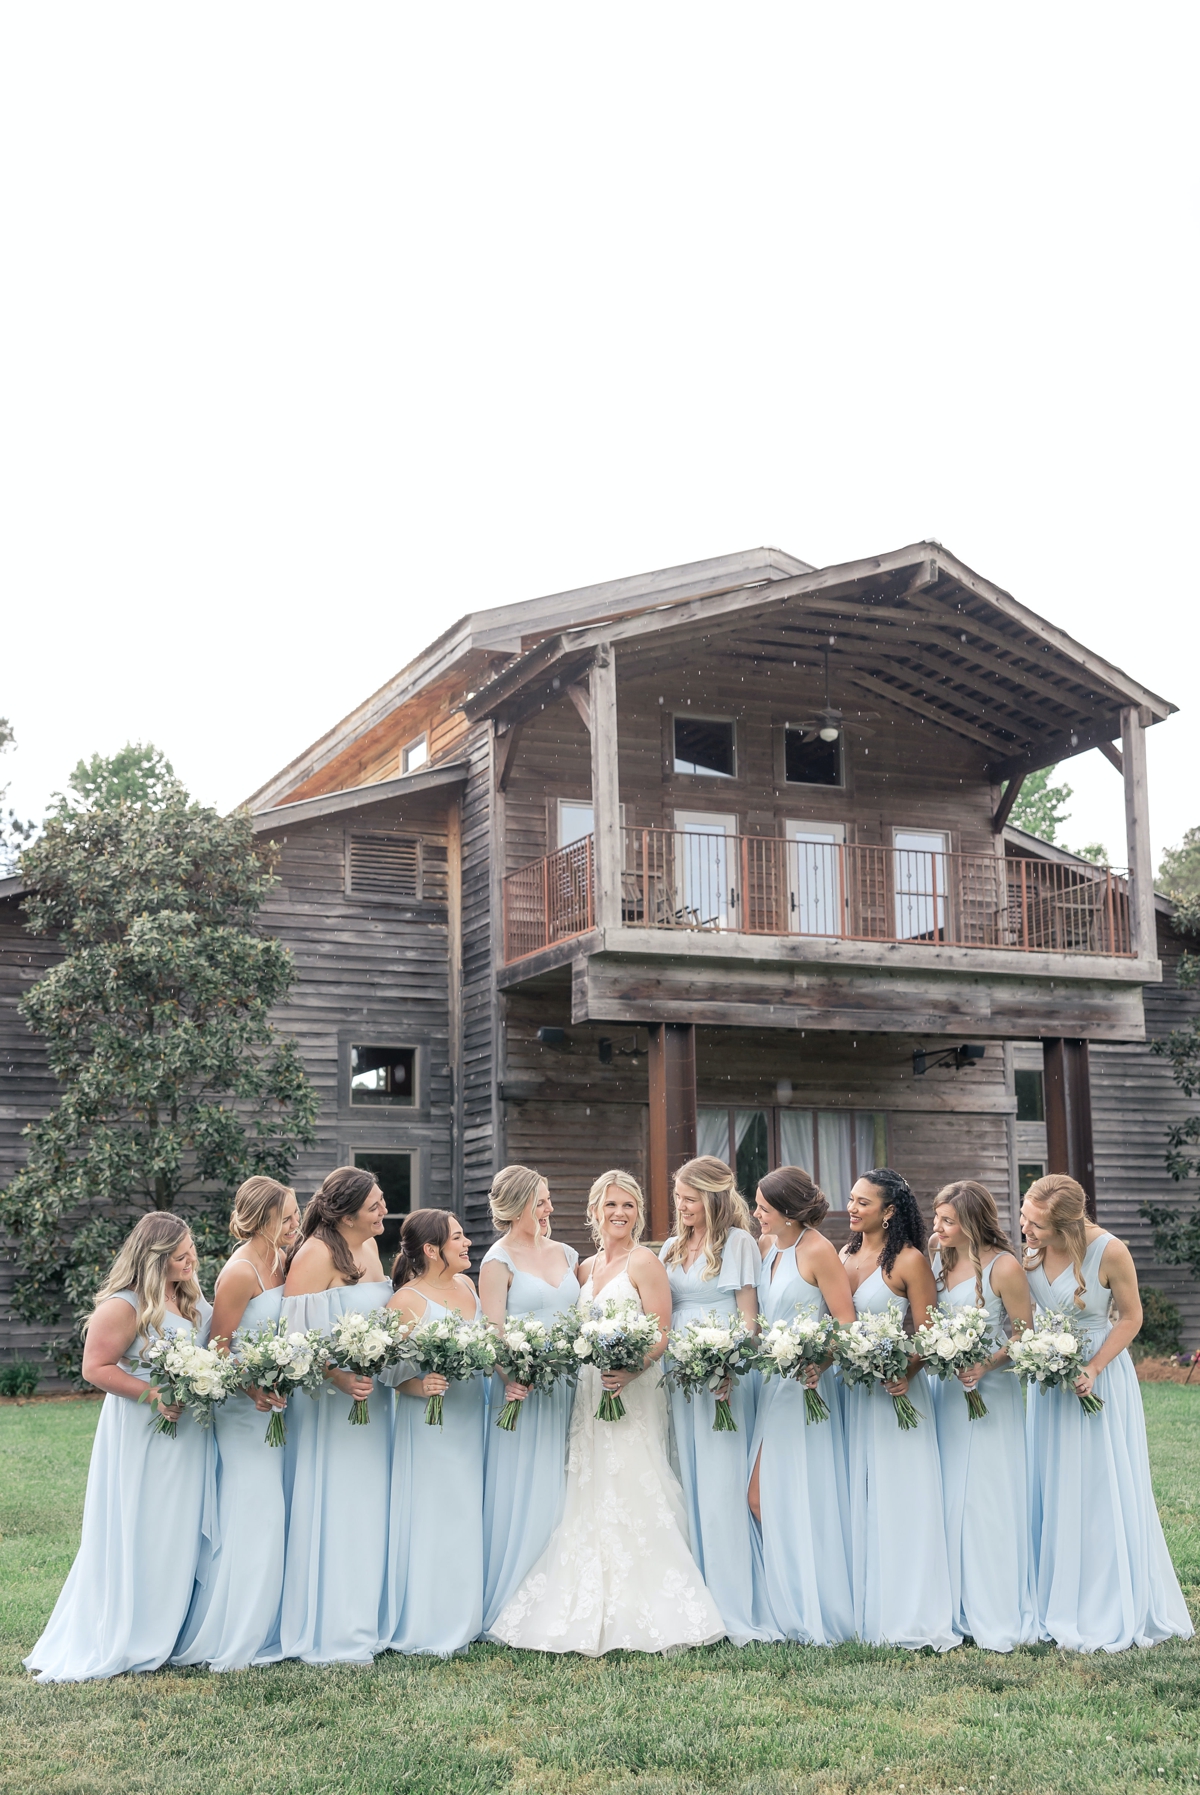 Grace and her bridesmaids smiling at each other in front of Walters Barn on her wedding day.